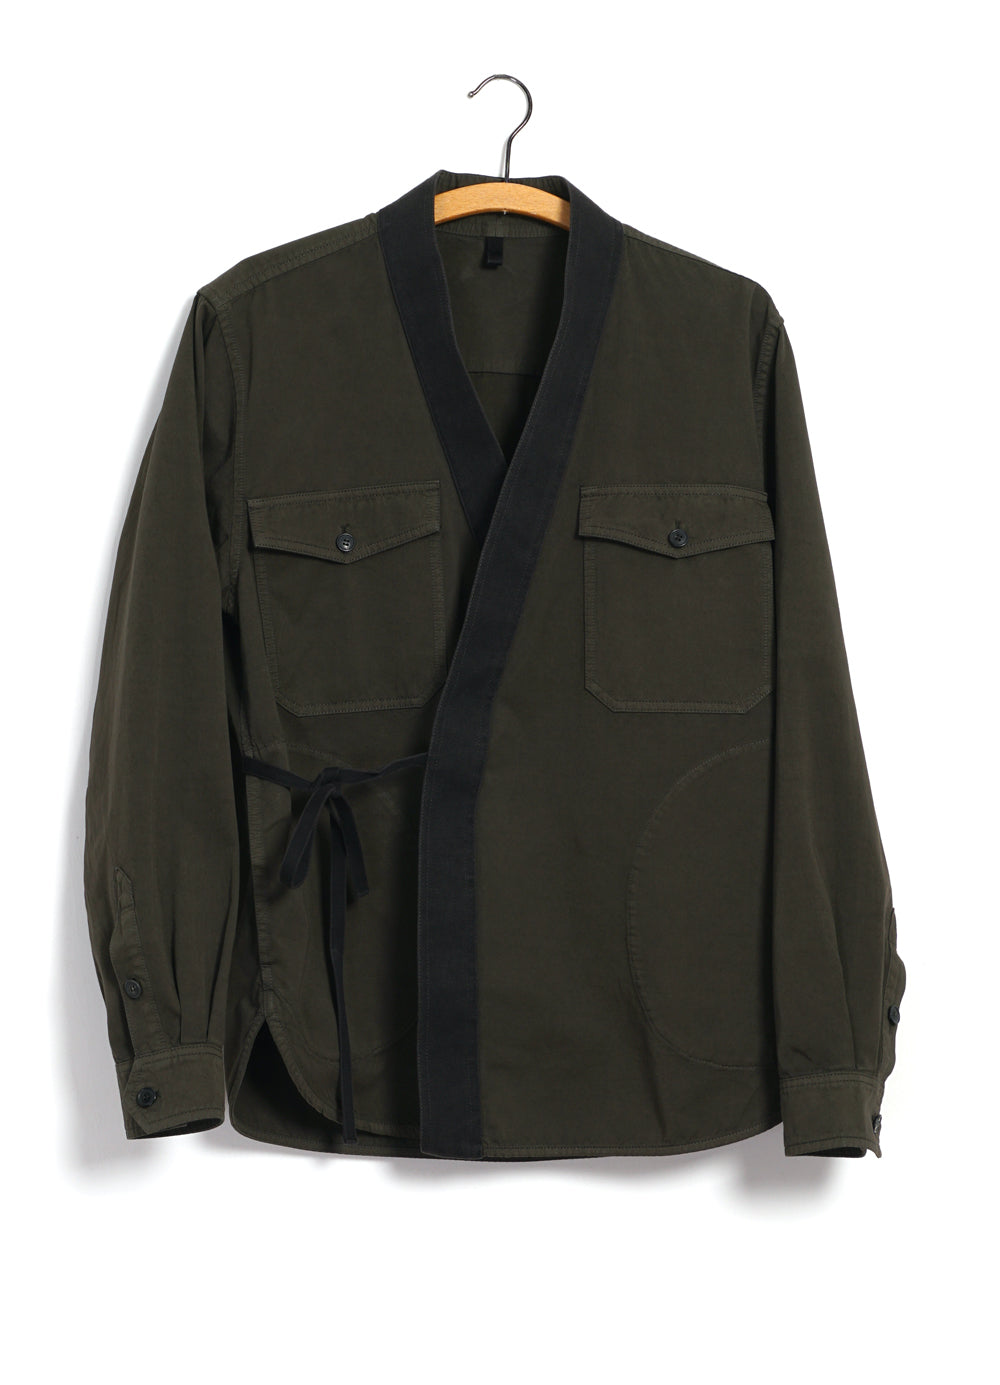 REMY | East & West Shirt Jacket | Olive Drill